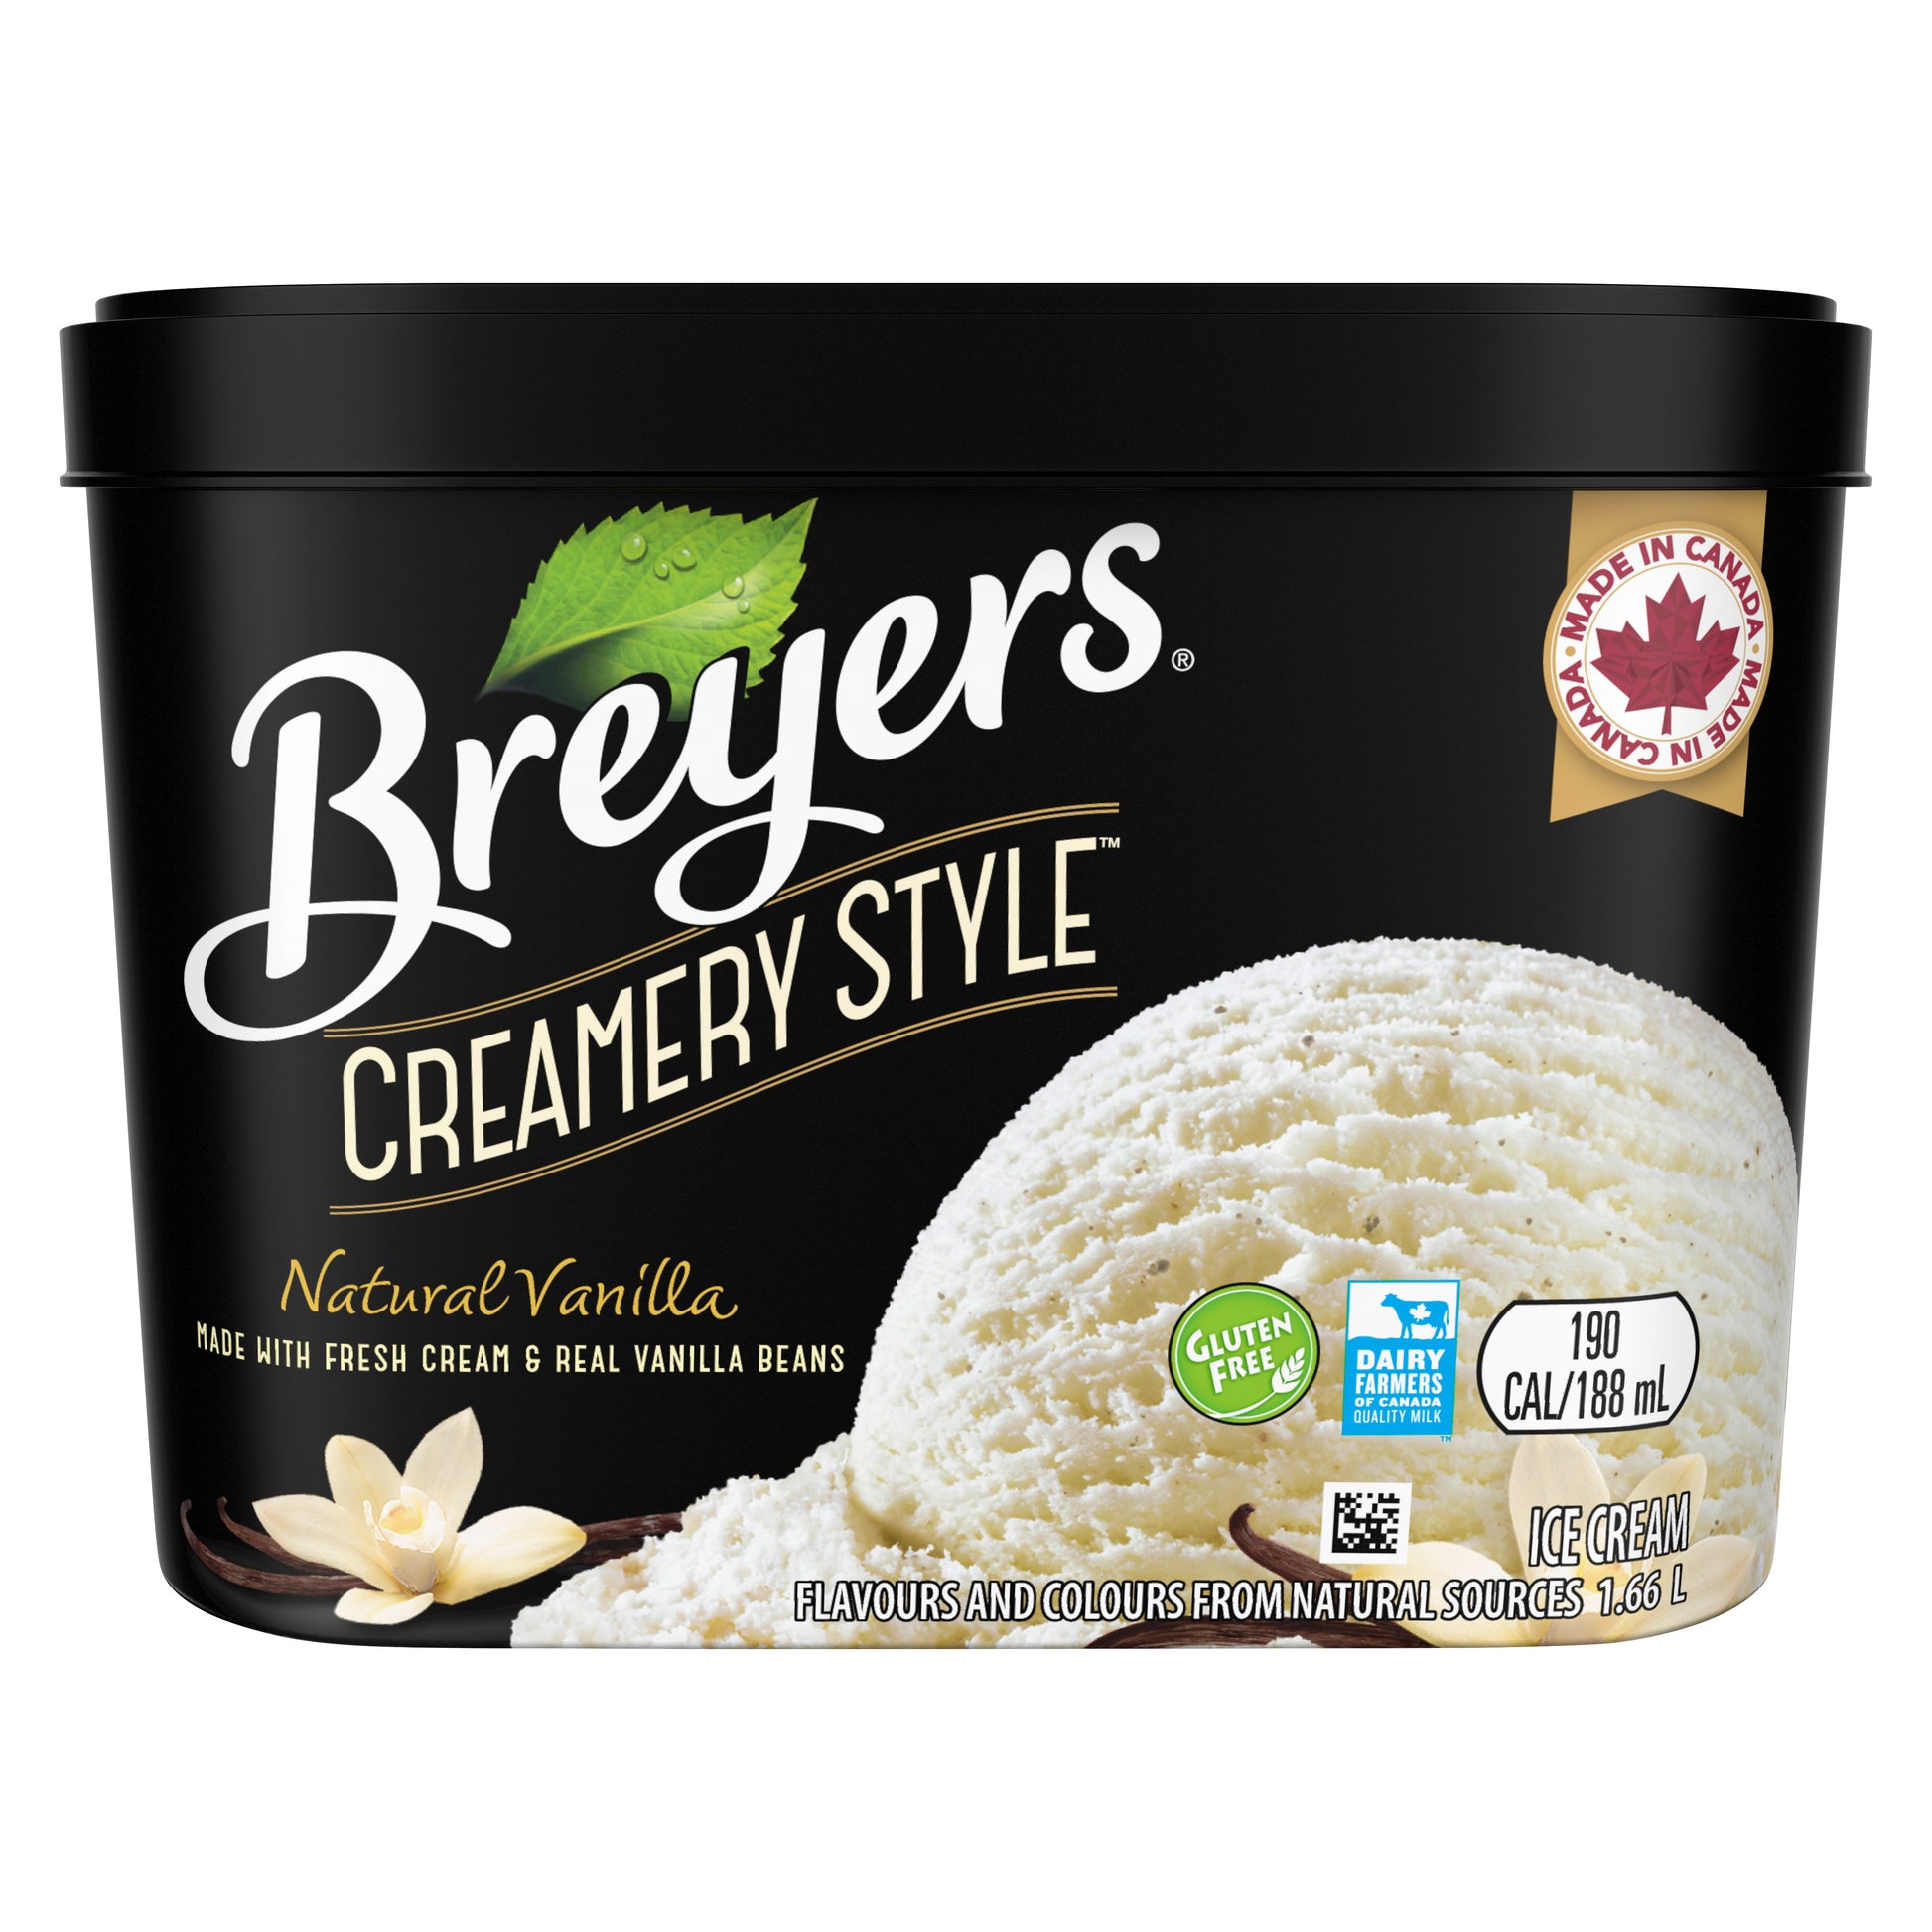 Breyers Creamery Style Natural Vanilla 1.66 L front of pack,Nutritional facts, Ingredient list,Dairy Farmers of Canada Quality Milk logo,Breyers Creamery Style pledge,Crafted in a Canadian Creamery with antibiotic free cream and milk logo,Gluten Free logo, Kosher Dairy Log